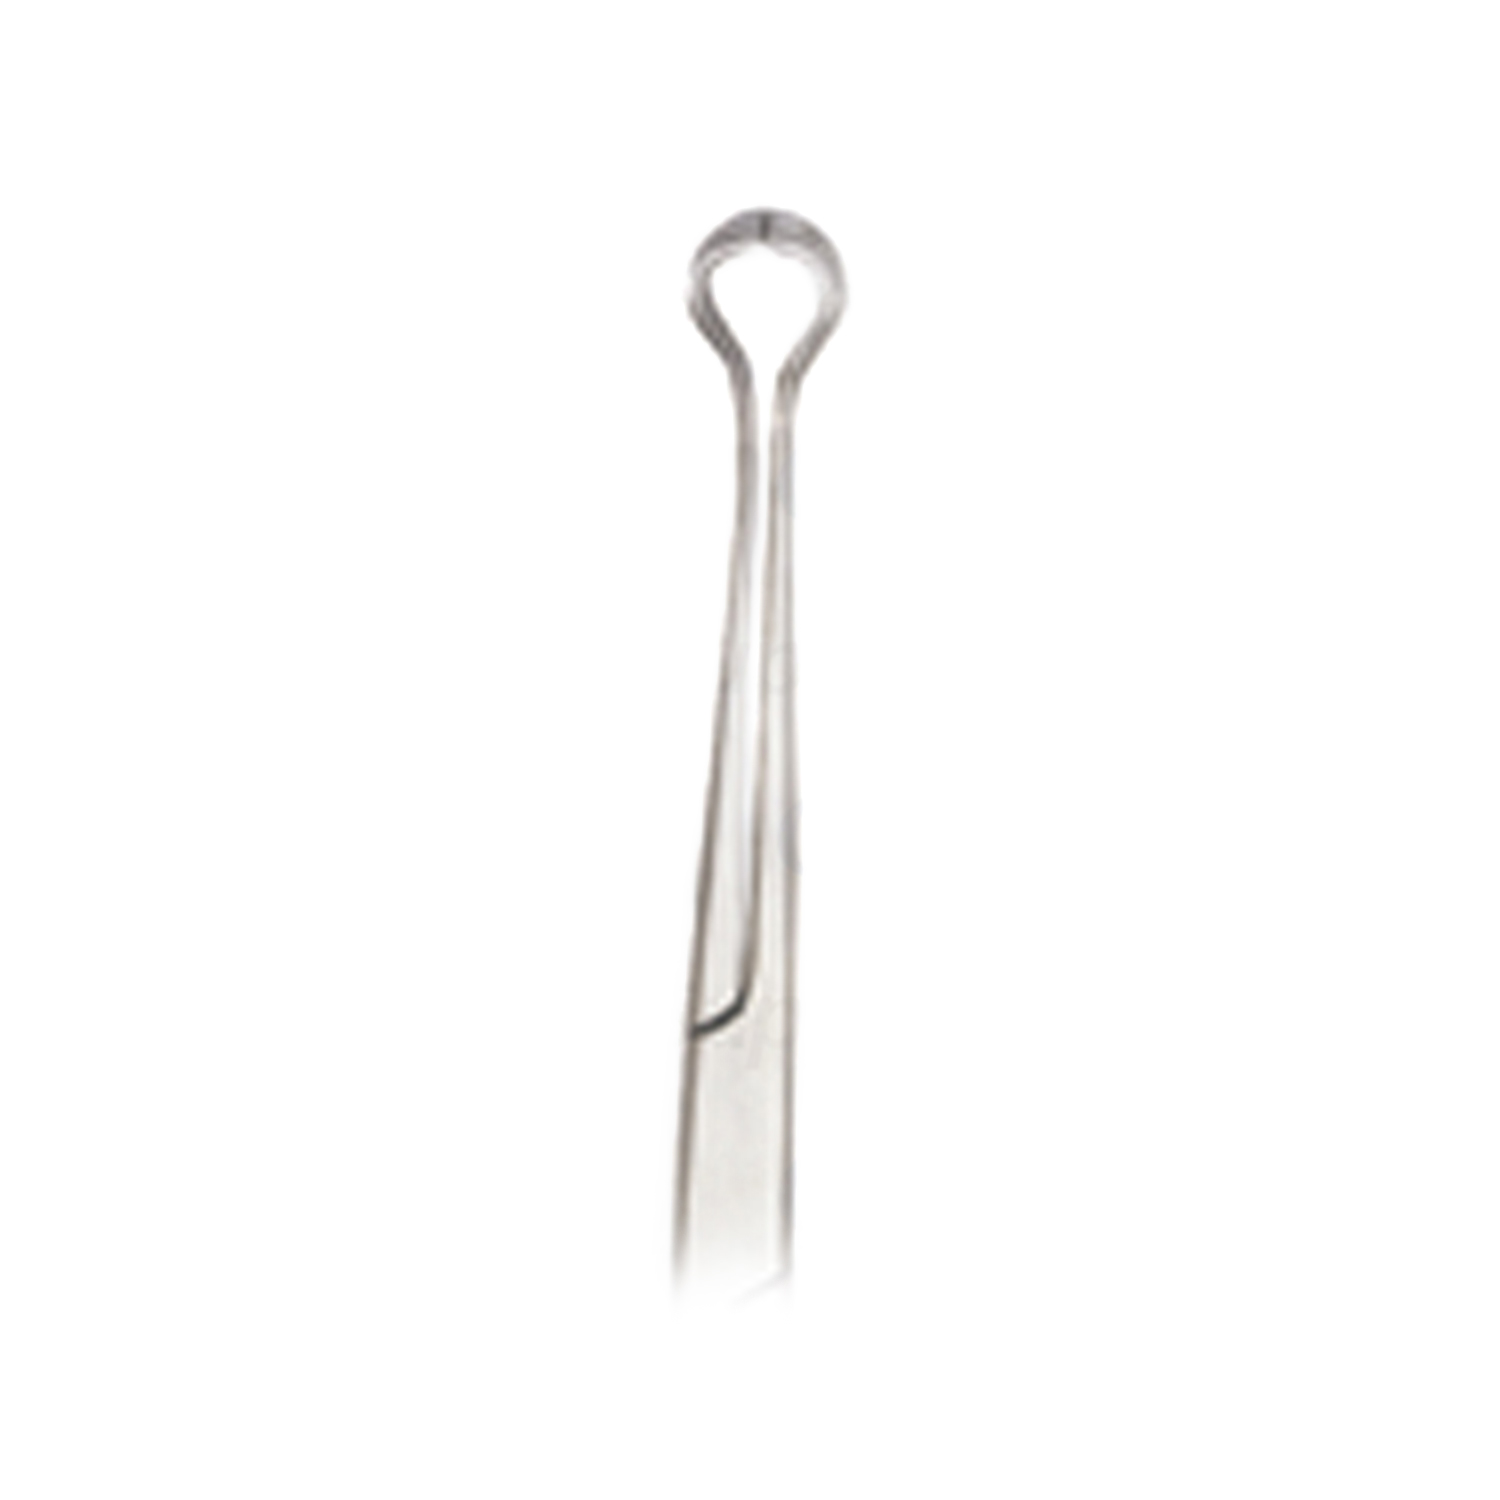 Surgical Instruments Marina Medical Babcock Forceps Avante Health Solutions